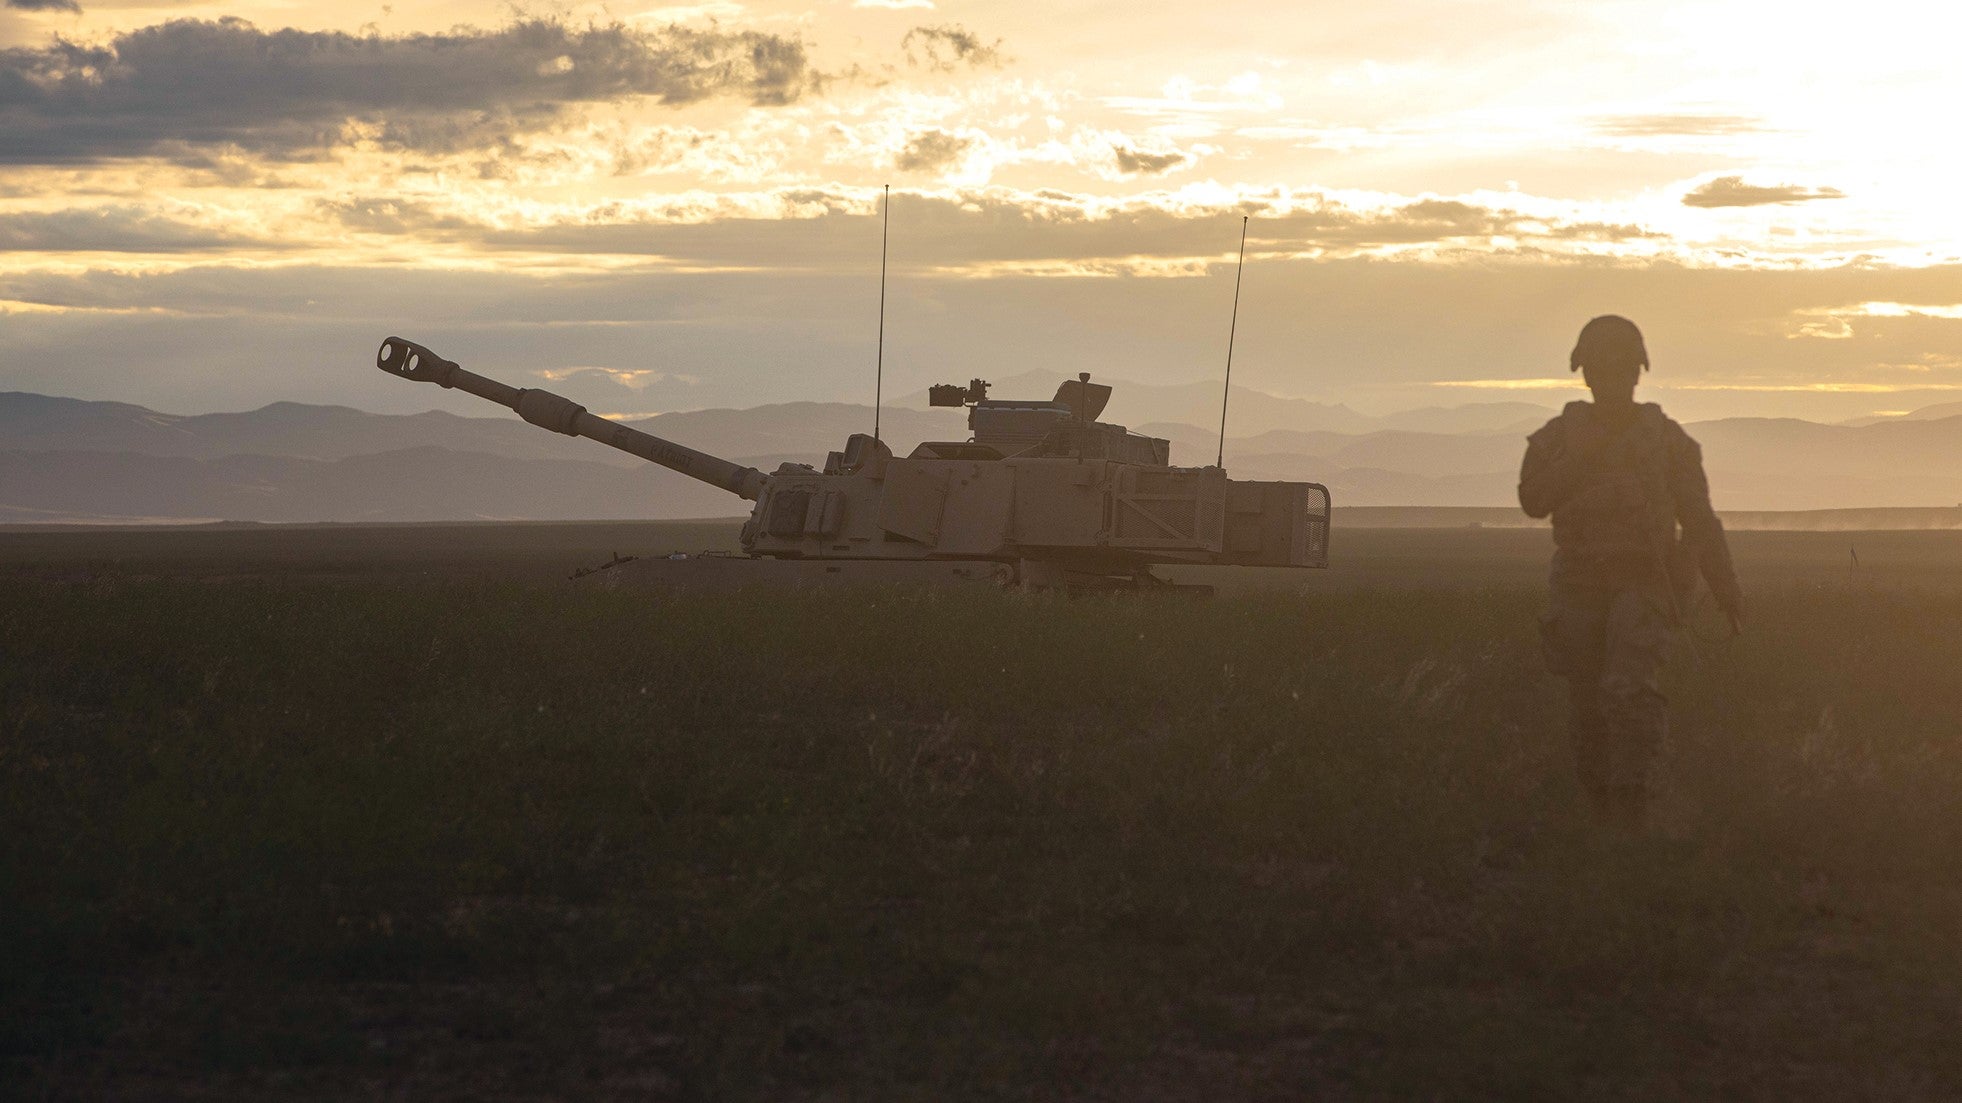 Pfc. Alisi Bloomfield, the first female cannon crew member in the Utah National Guard’s Battery B, 1st Battalion, 145th Field Artillery Regiment, walks from an M109 Paladin self-propelled howitzer during an exercise at Orchard Combat Training Center, Idaho. (Credit: Army National Guard/Staff Sgt. William Cowley)